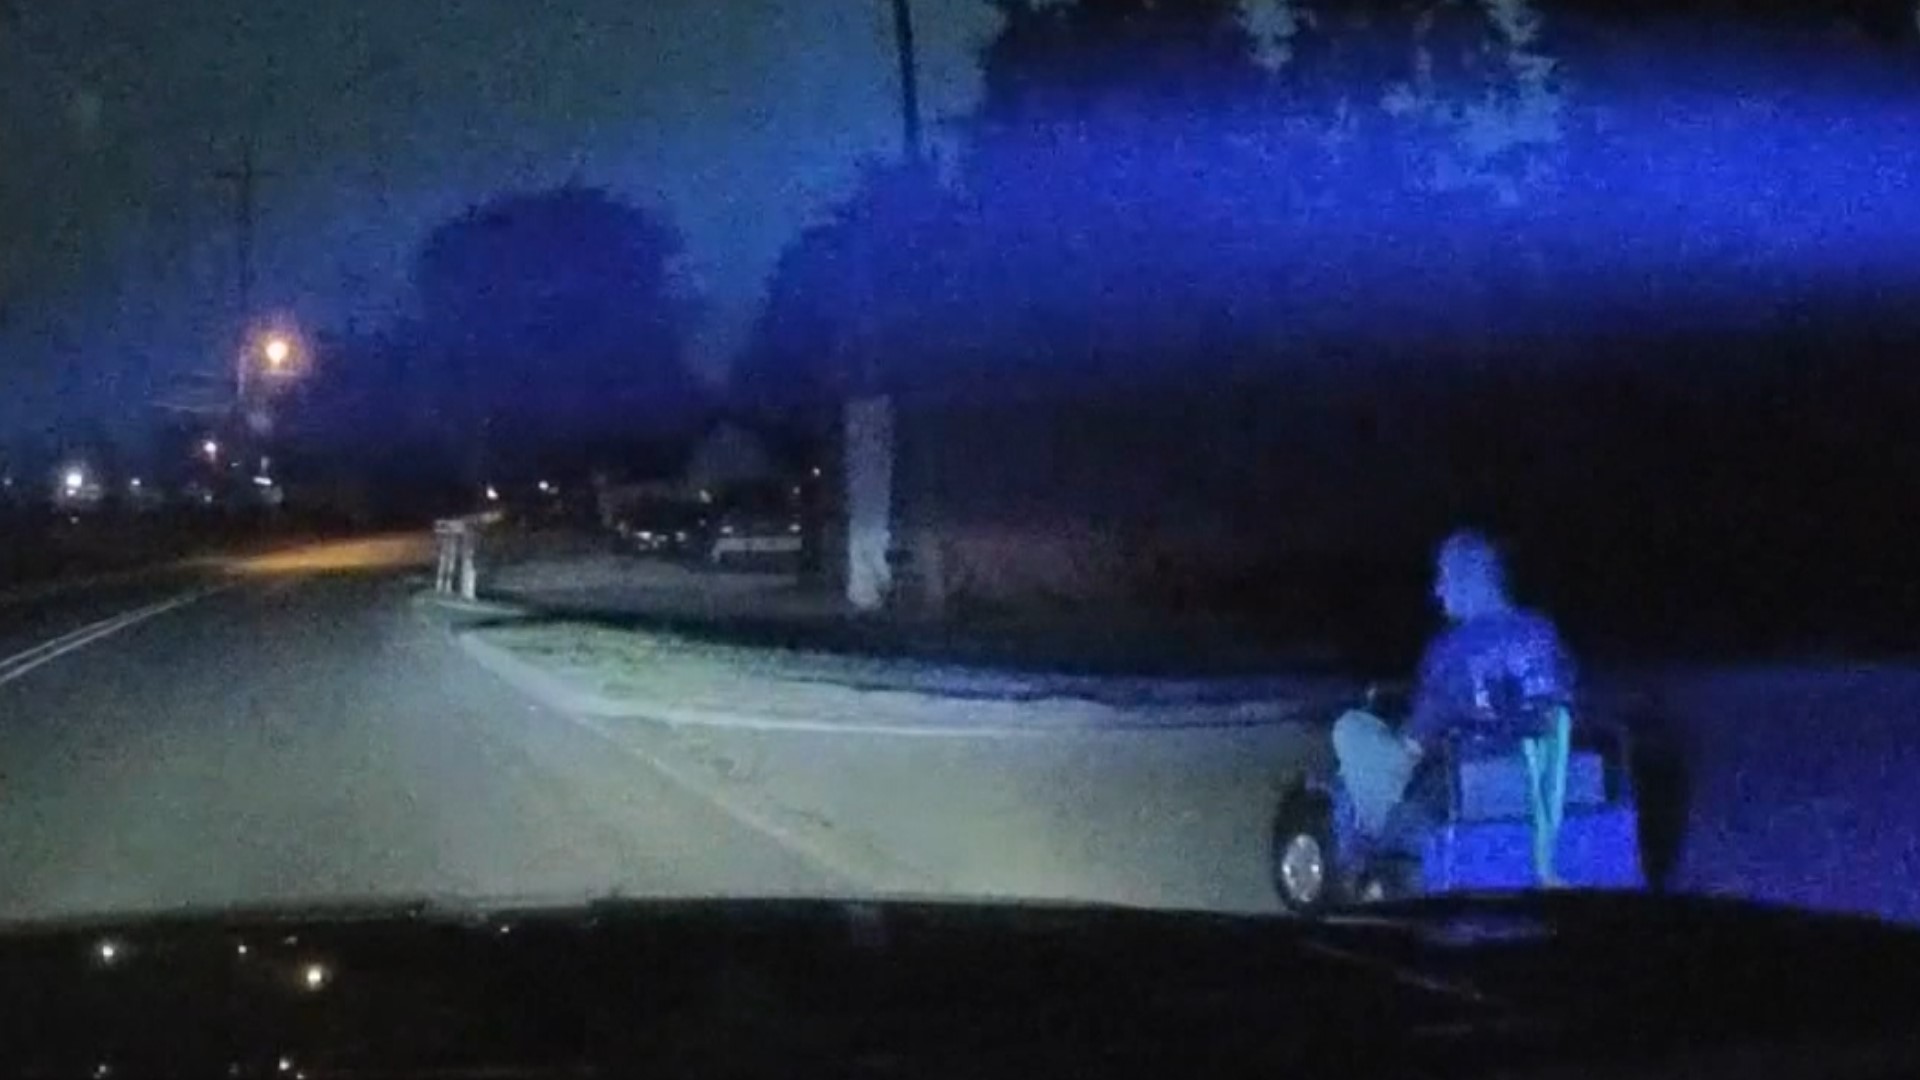 A man in Vincennes learned a hard lesson last month when he was arrested for OWI while driving a Power Wheels vehicle on the street.